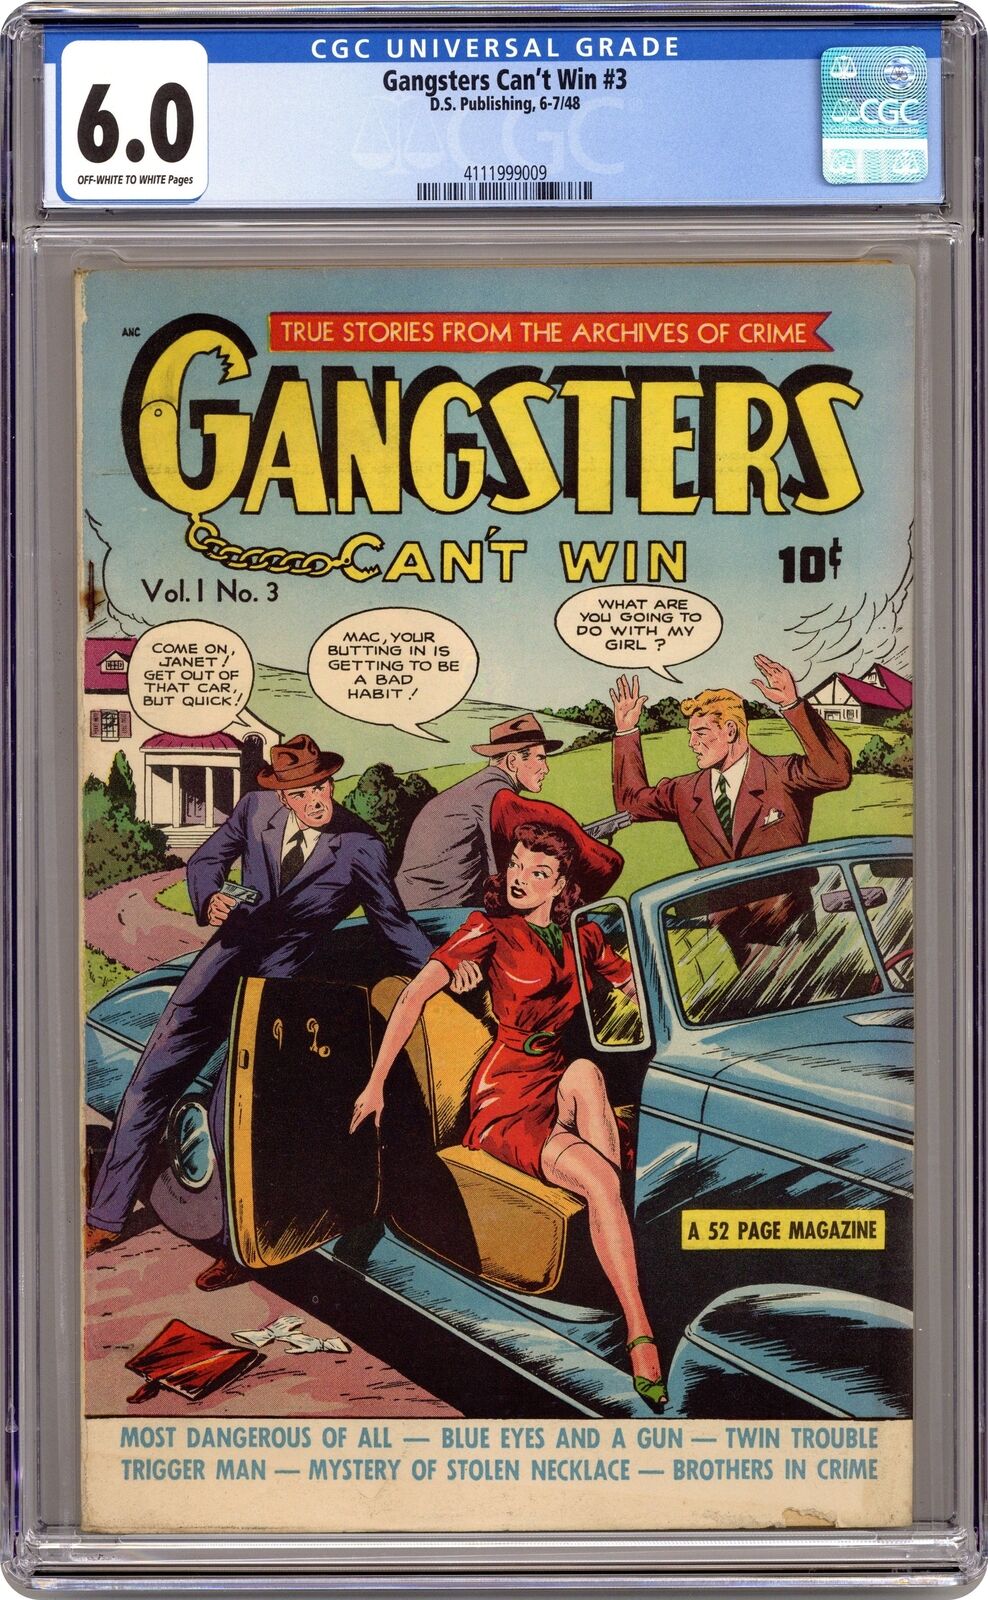 Gangsters Can't Win #3 CGC 6.0 1948 4111999009